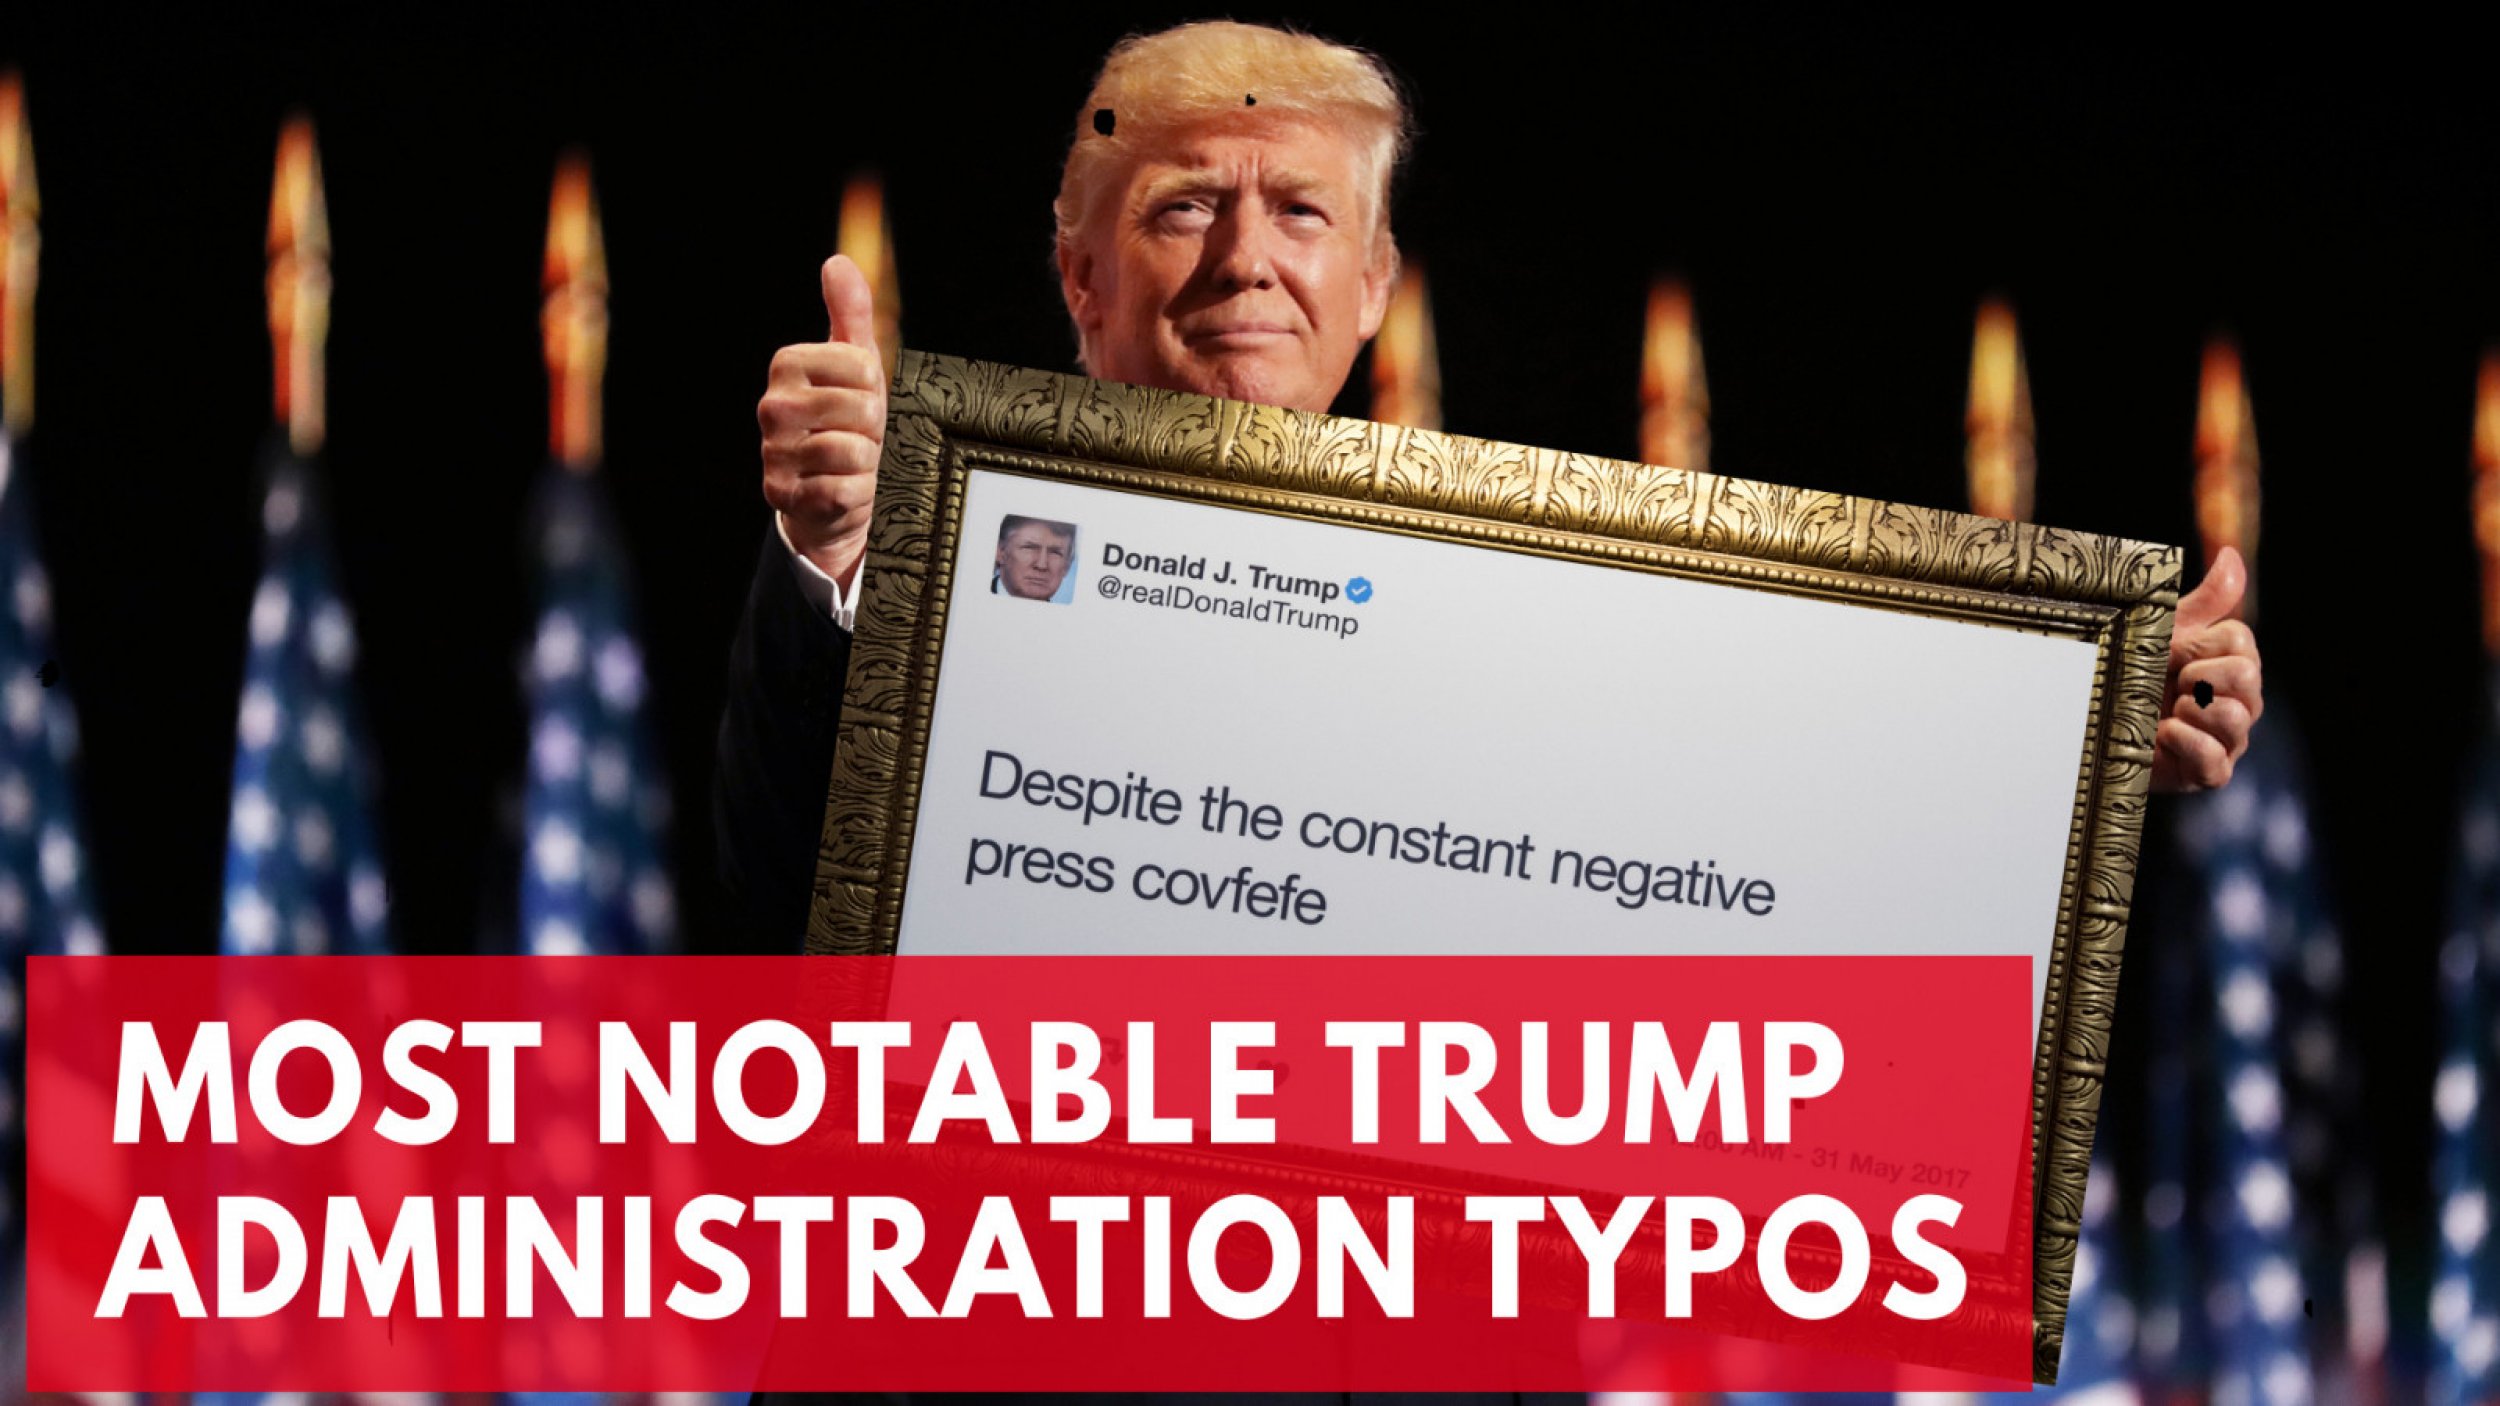 From Covfefe To Uniom, The Most Notorious Spelling Mistakes Made By The Trump Administration